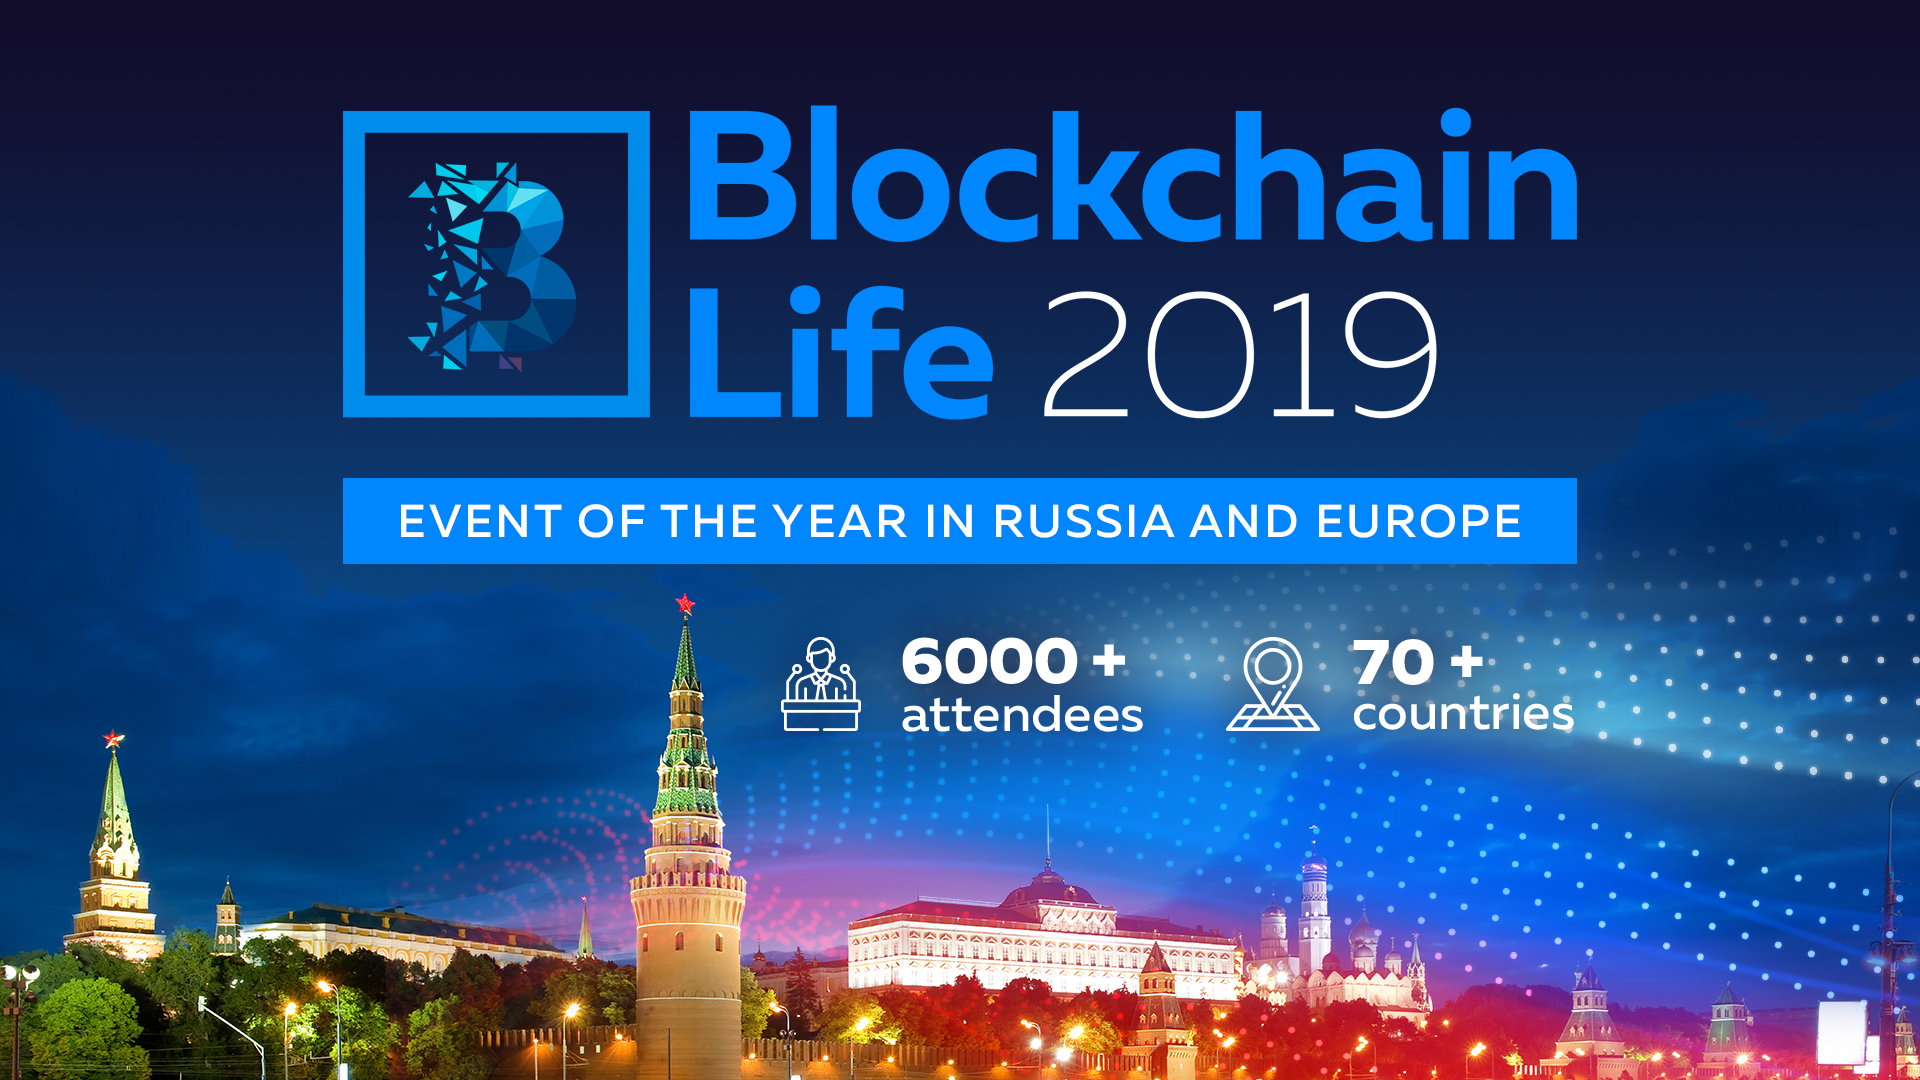 blockchain conference moscow